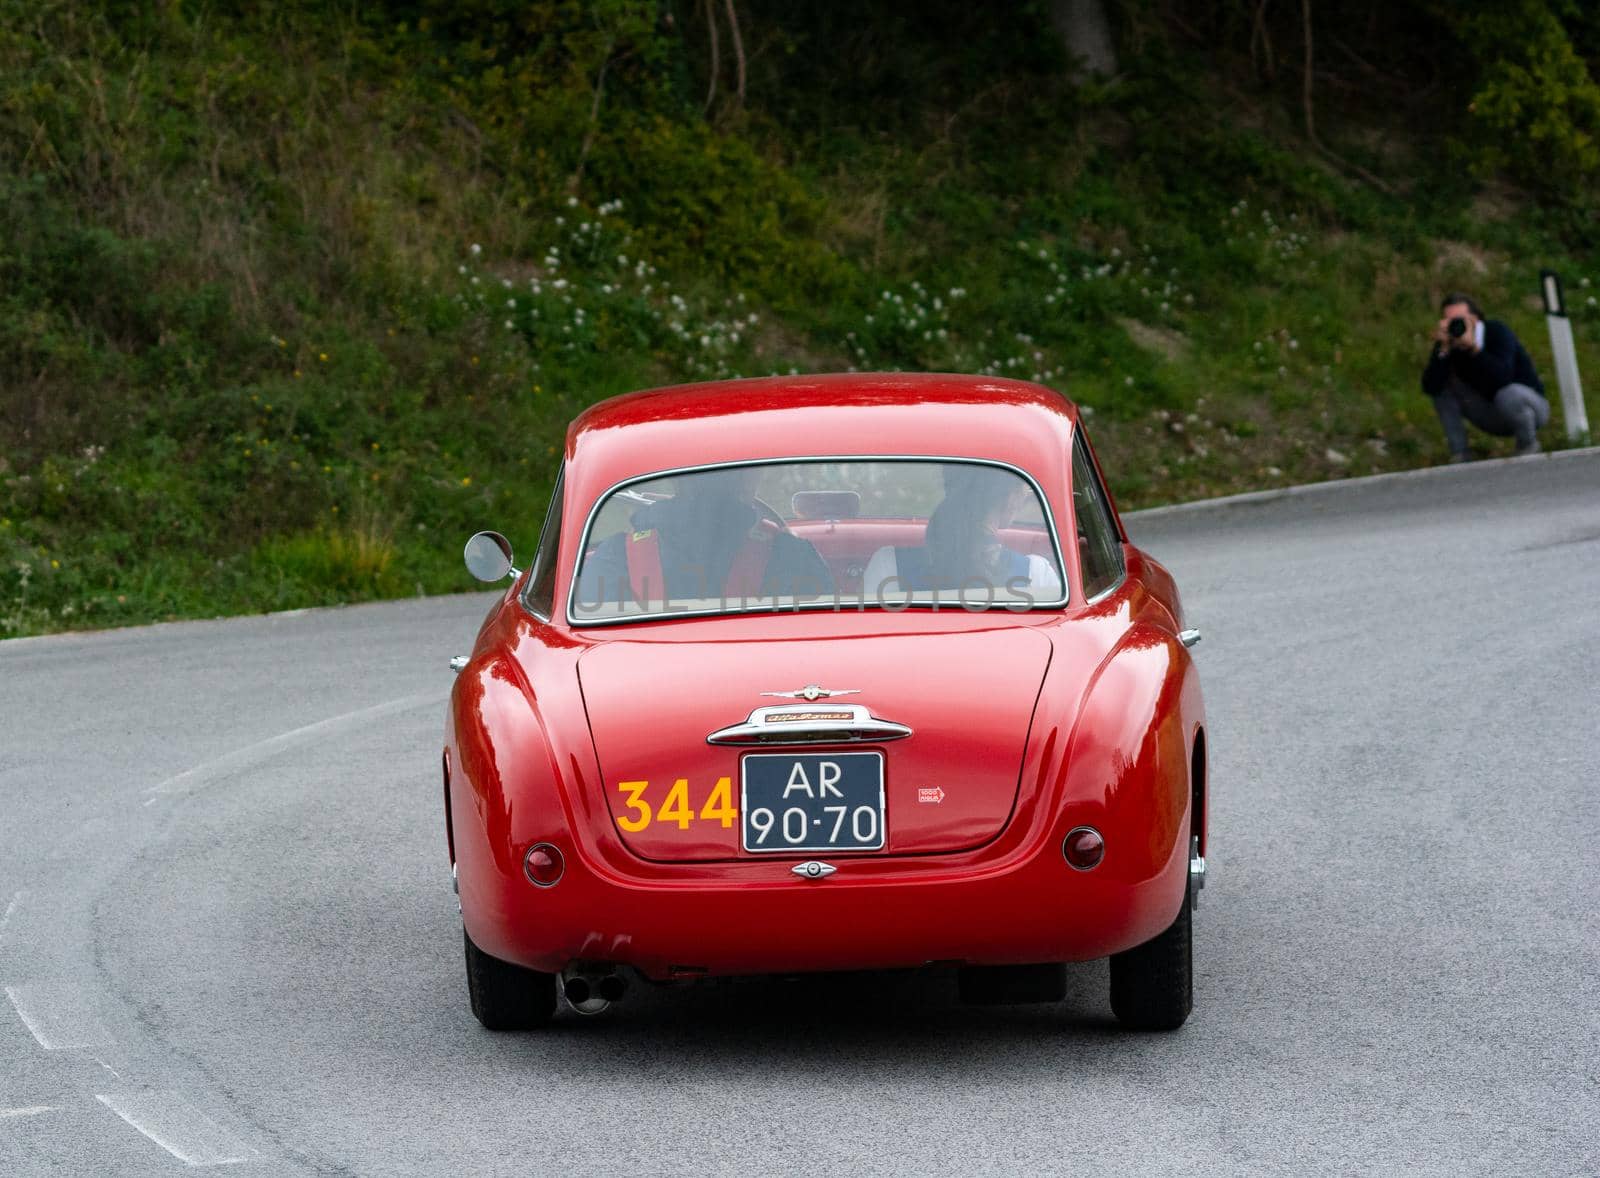 ALFA ROMEO 1900 C SUPER SPRINT TOURING 1955 on an old racing car in rally Mille Miglia 2020 the famous italian historical race (1927-1957) by massimocampanari